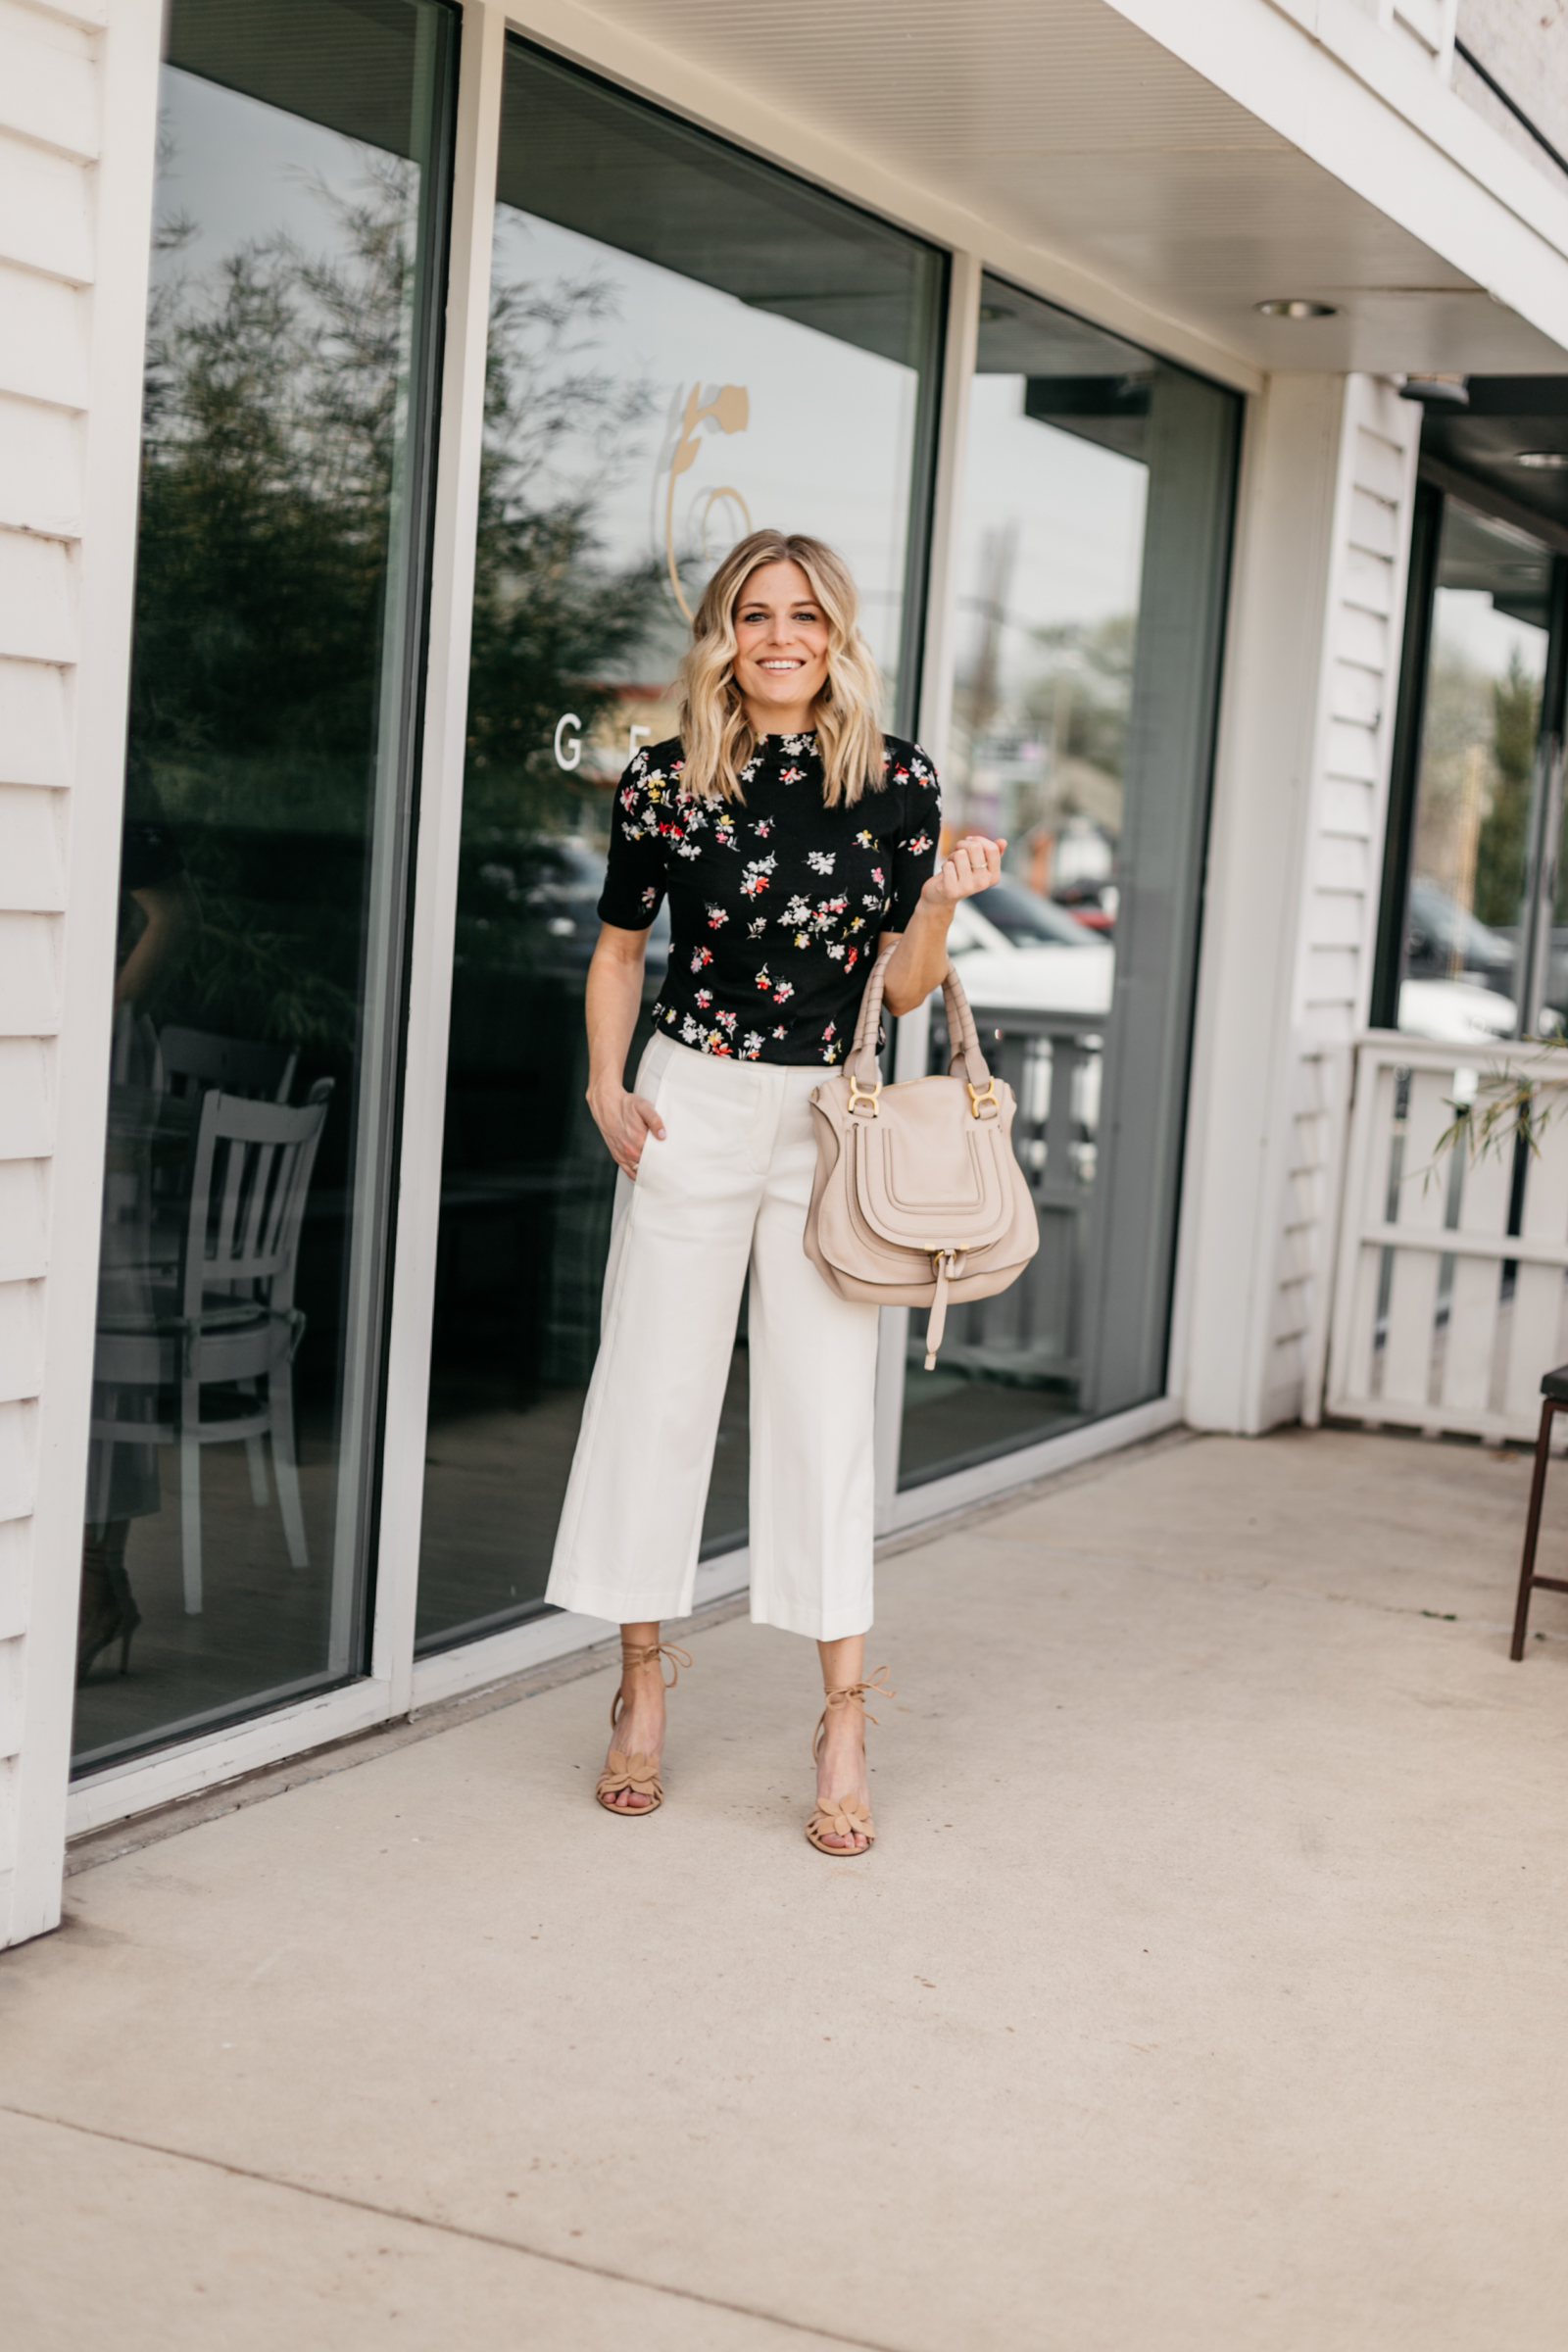 Brooke Burnett is featuring a Floral Mock Neck Top and The Wide Leg Marina Pant from Ann Taylor